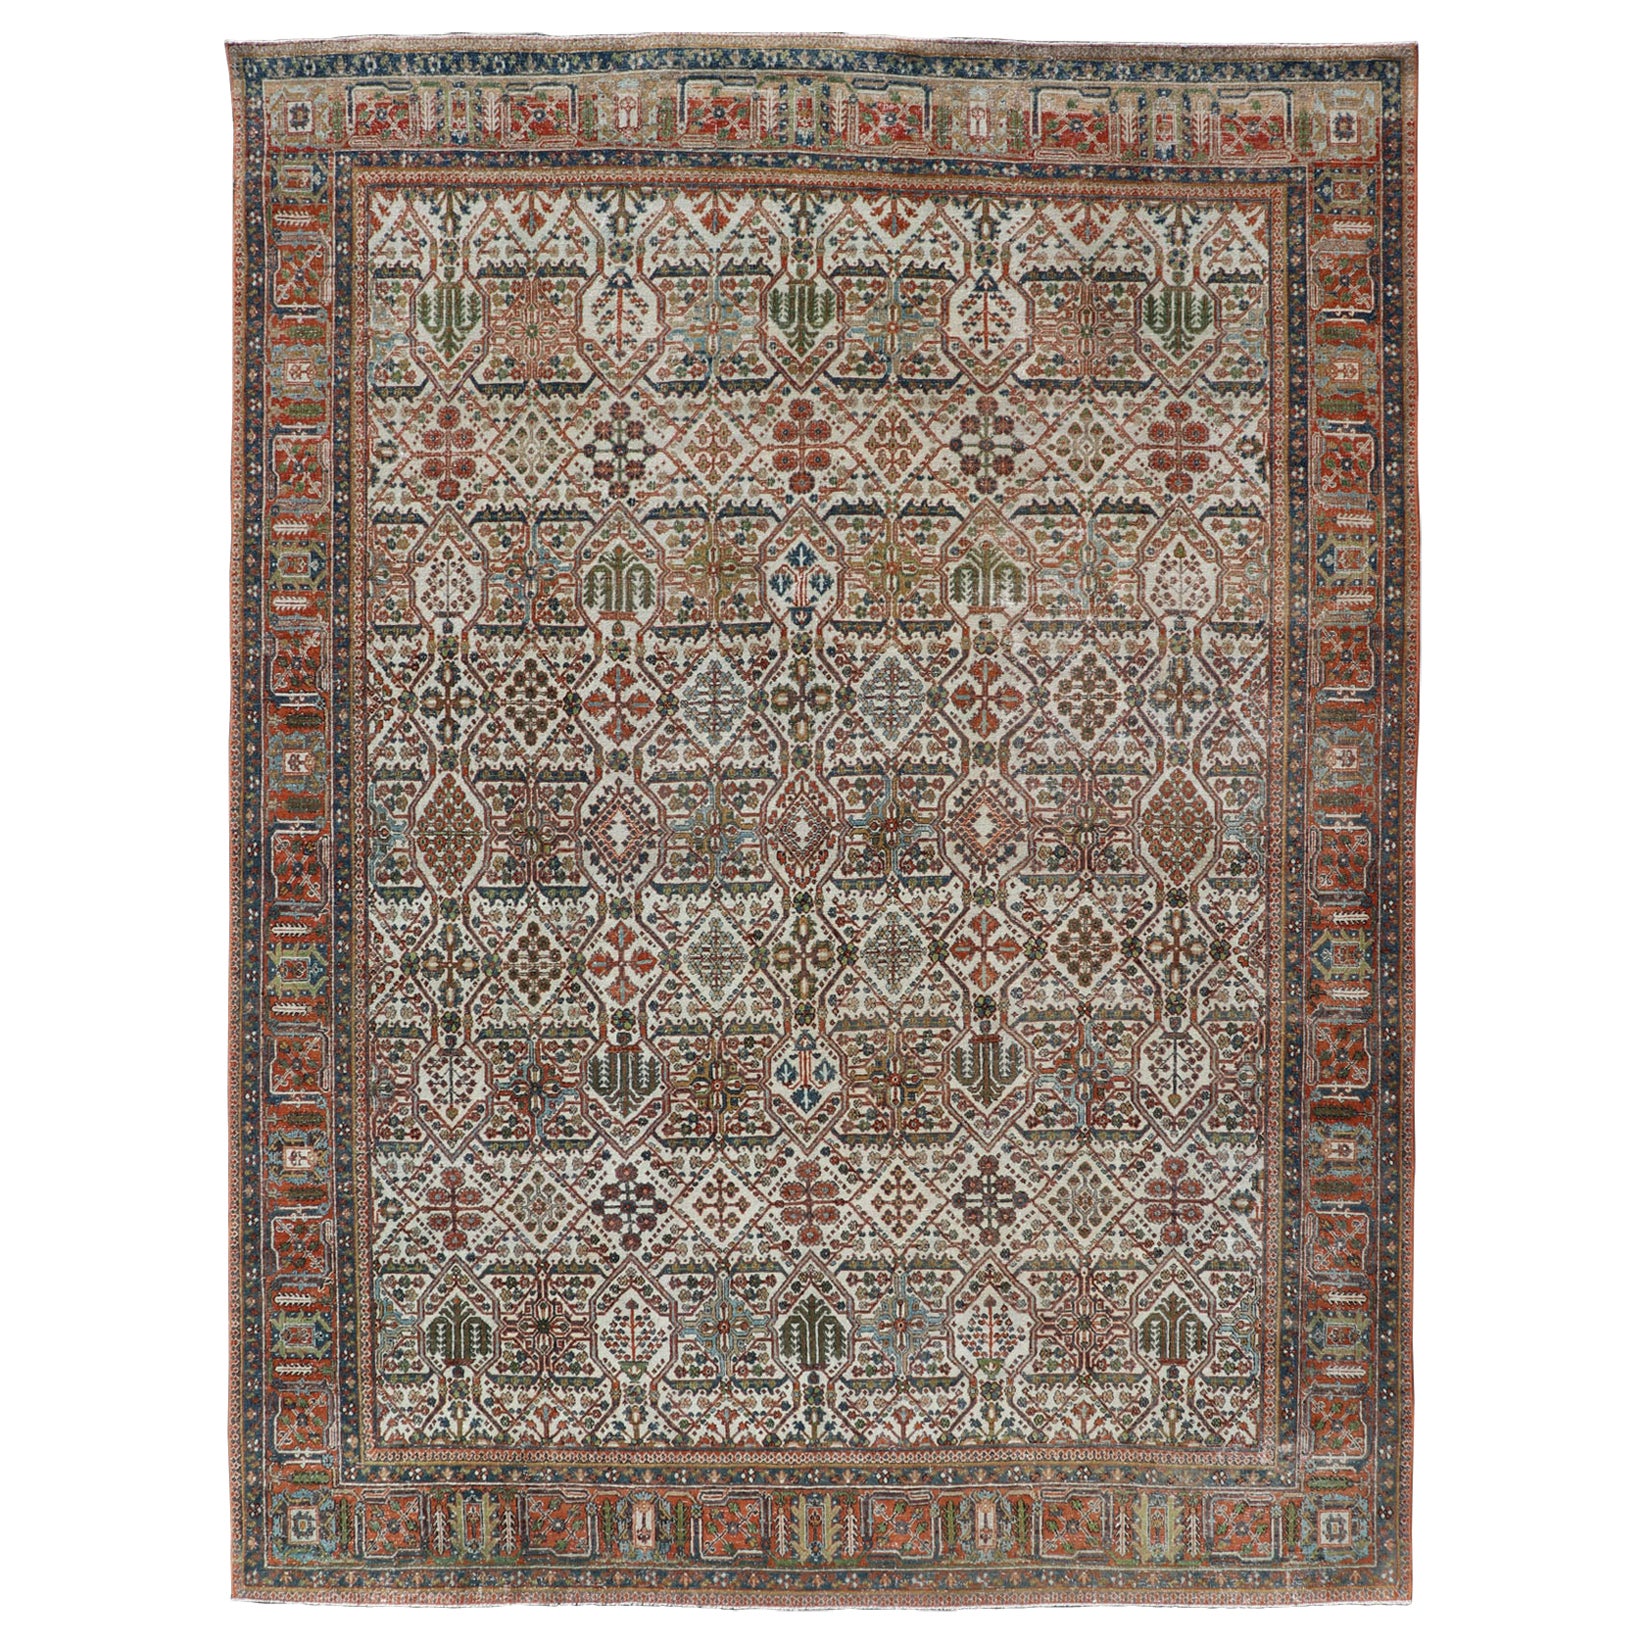 Antique Persian Joshegan Rug in Ivory Background With Blue, Green, & Copper 